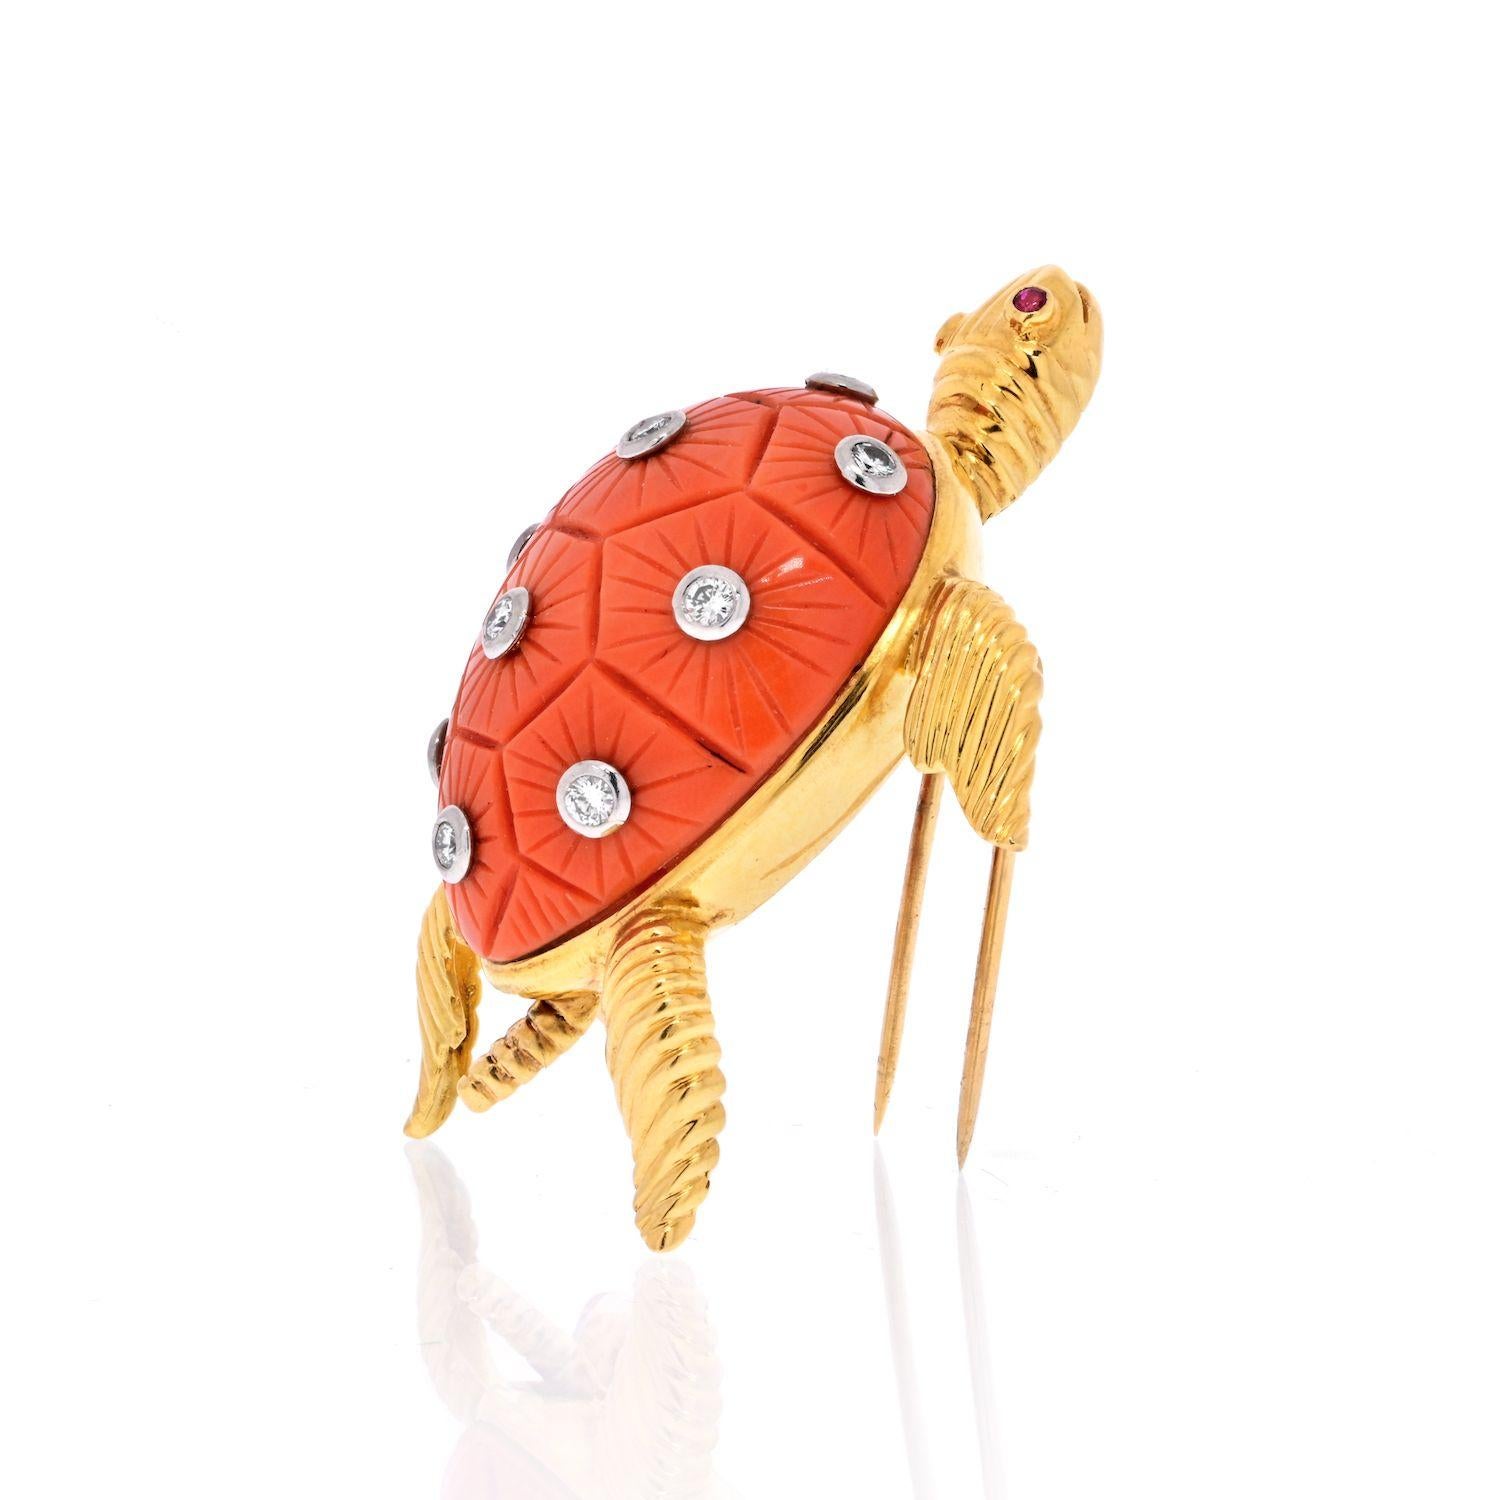 Does anybody else Love Turtles?

18K Yellow Gold Coral Turtle with Diamonds on the Shell Brooch.

18k yellow gold turtle brooch, featuring a movable head, set with carved coral shell, adorned with ruby eyes and approx. 0.30ctw in diamonds. 
This